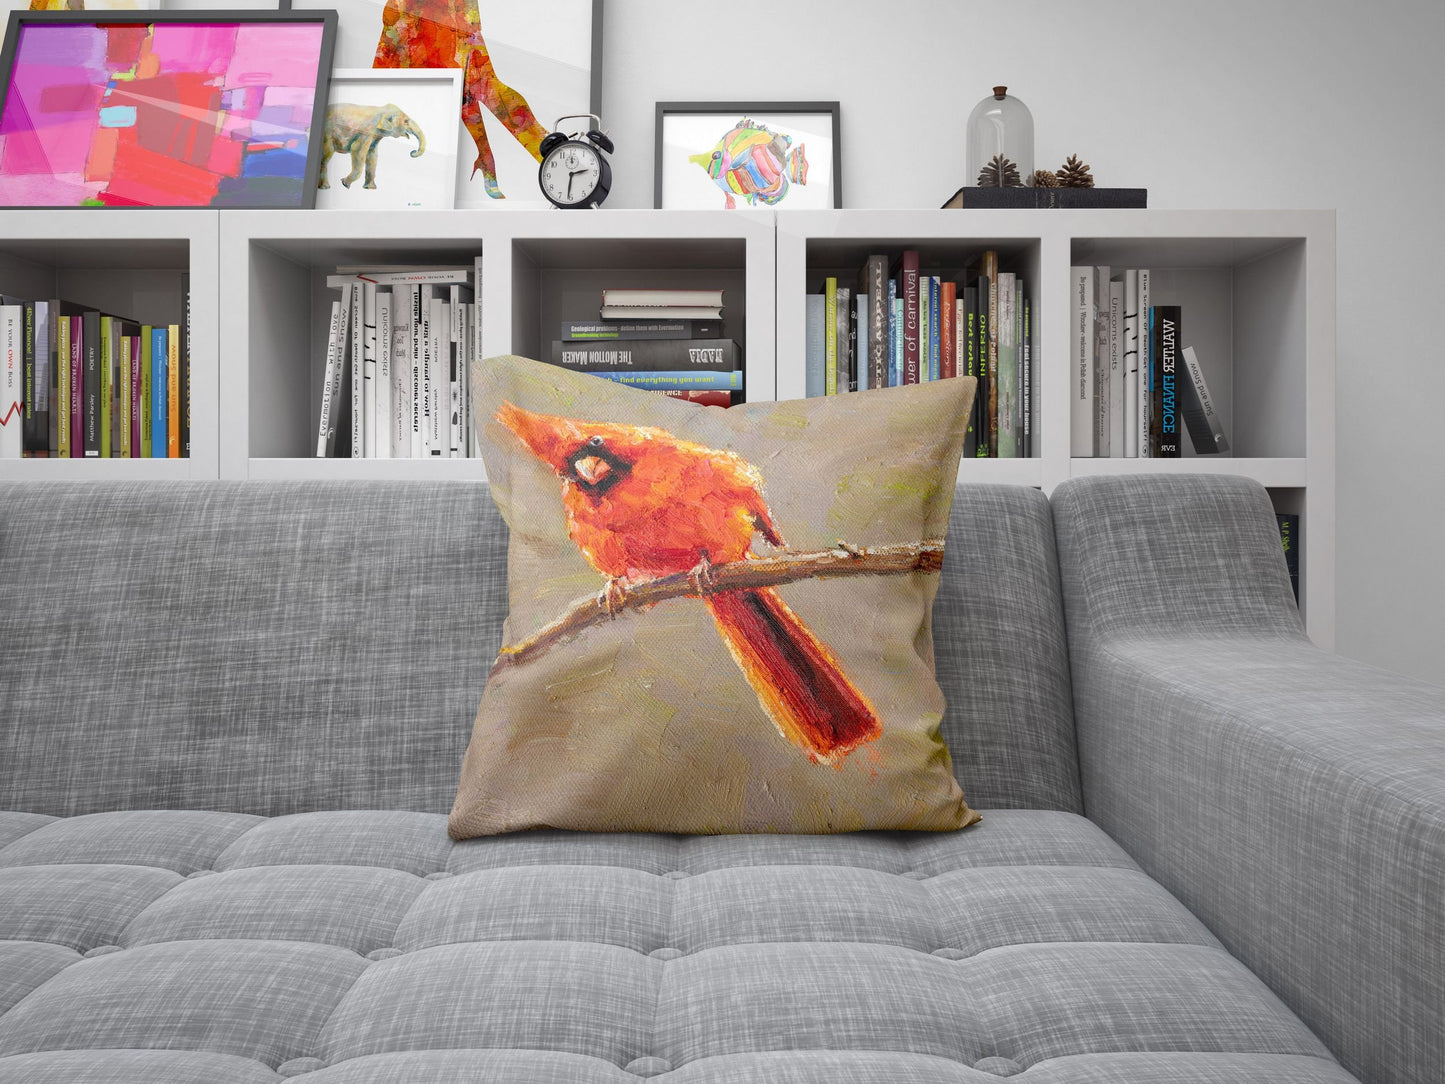 Throw Pillow Cover, Northern Cardinal Male Red Bird Pillow, Cute Pillow Cases, Large Pillow Cases, Home Decor Pillow